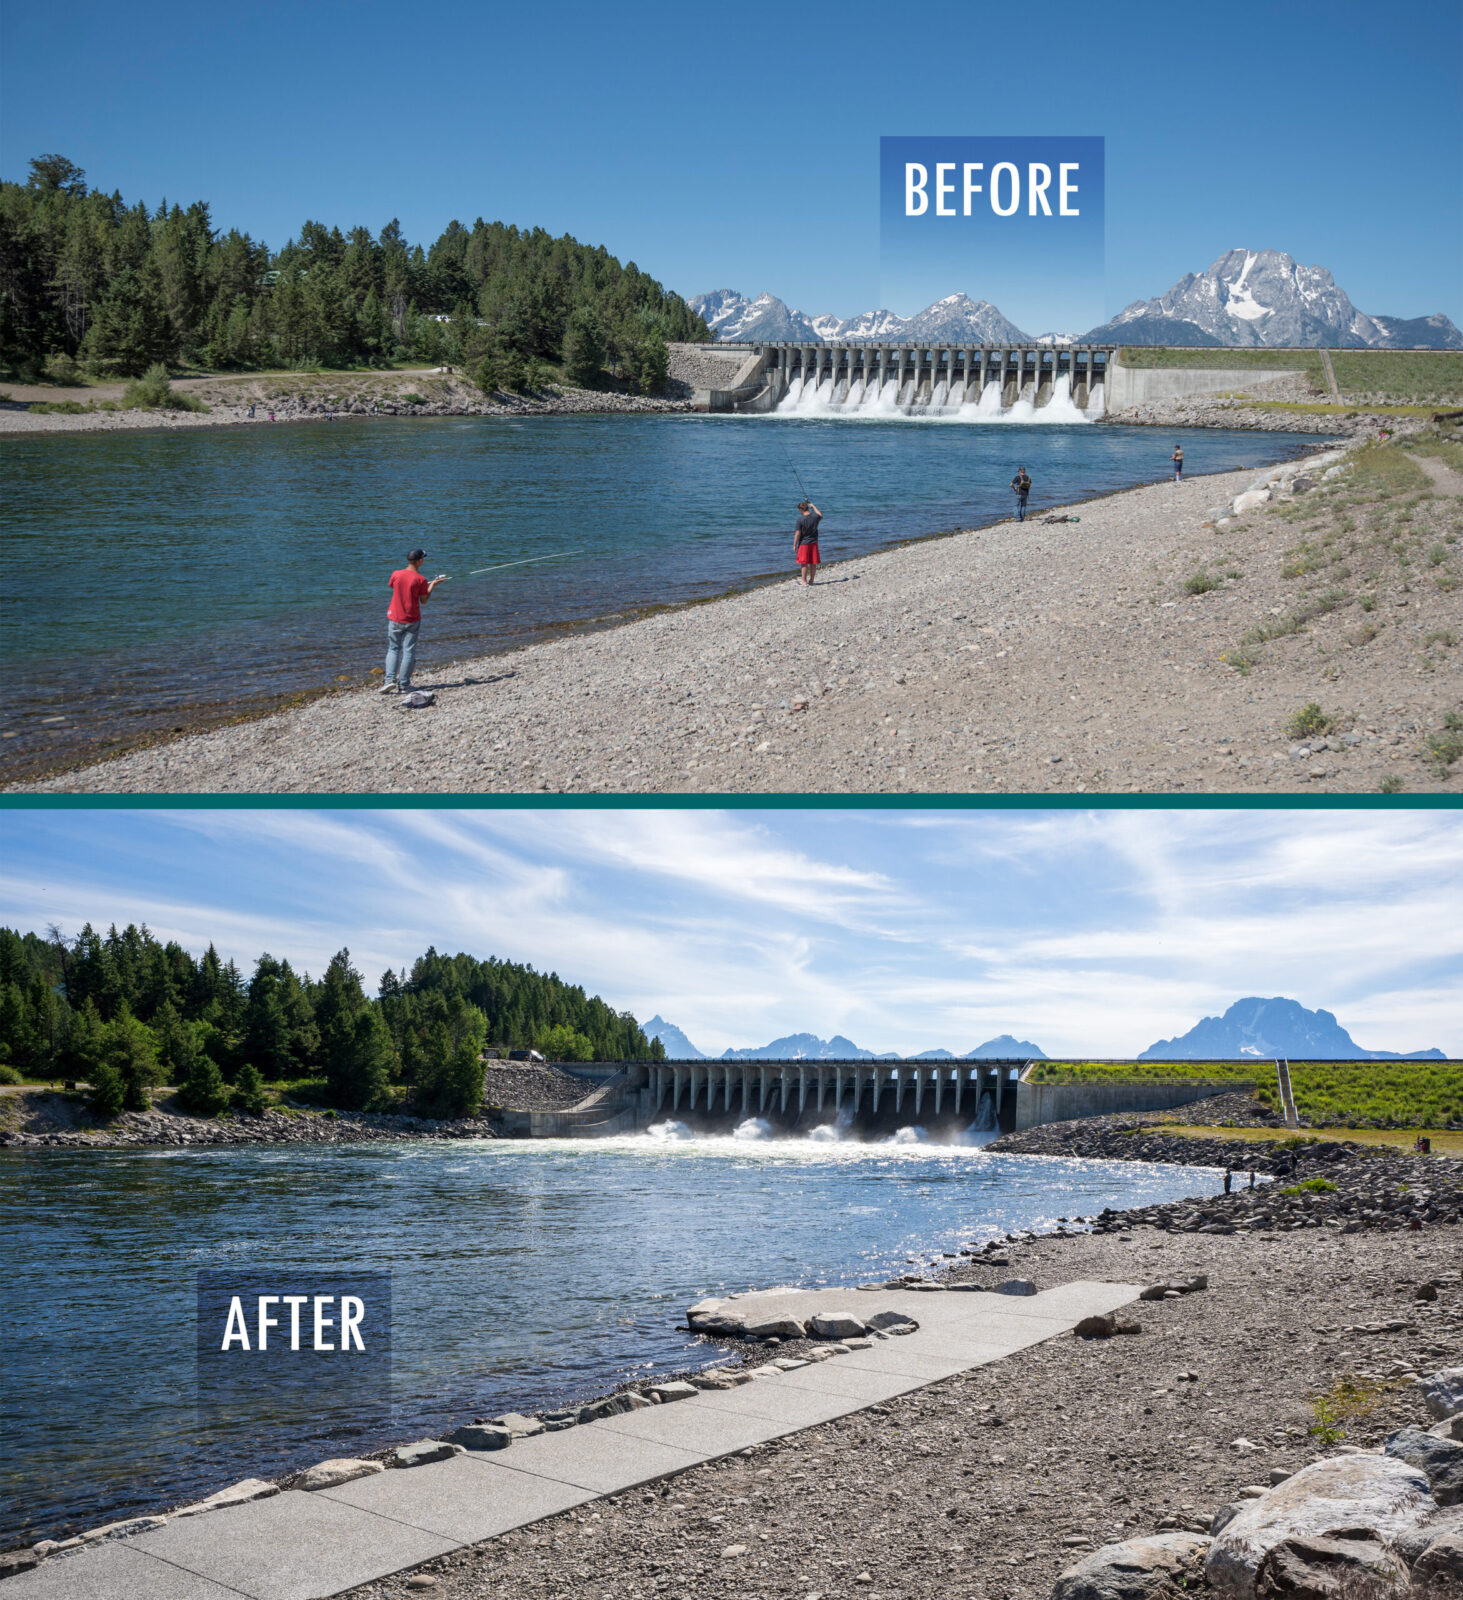 A before and after image of the Jackson Lake Dam project, showcasing the newly built accessible fishing ramp. This new ramp provides fishing opportunities for those in wheelchairs.